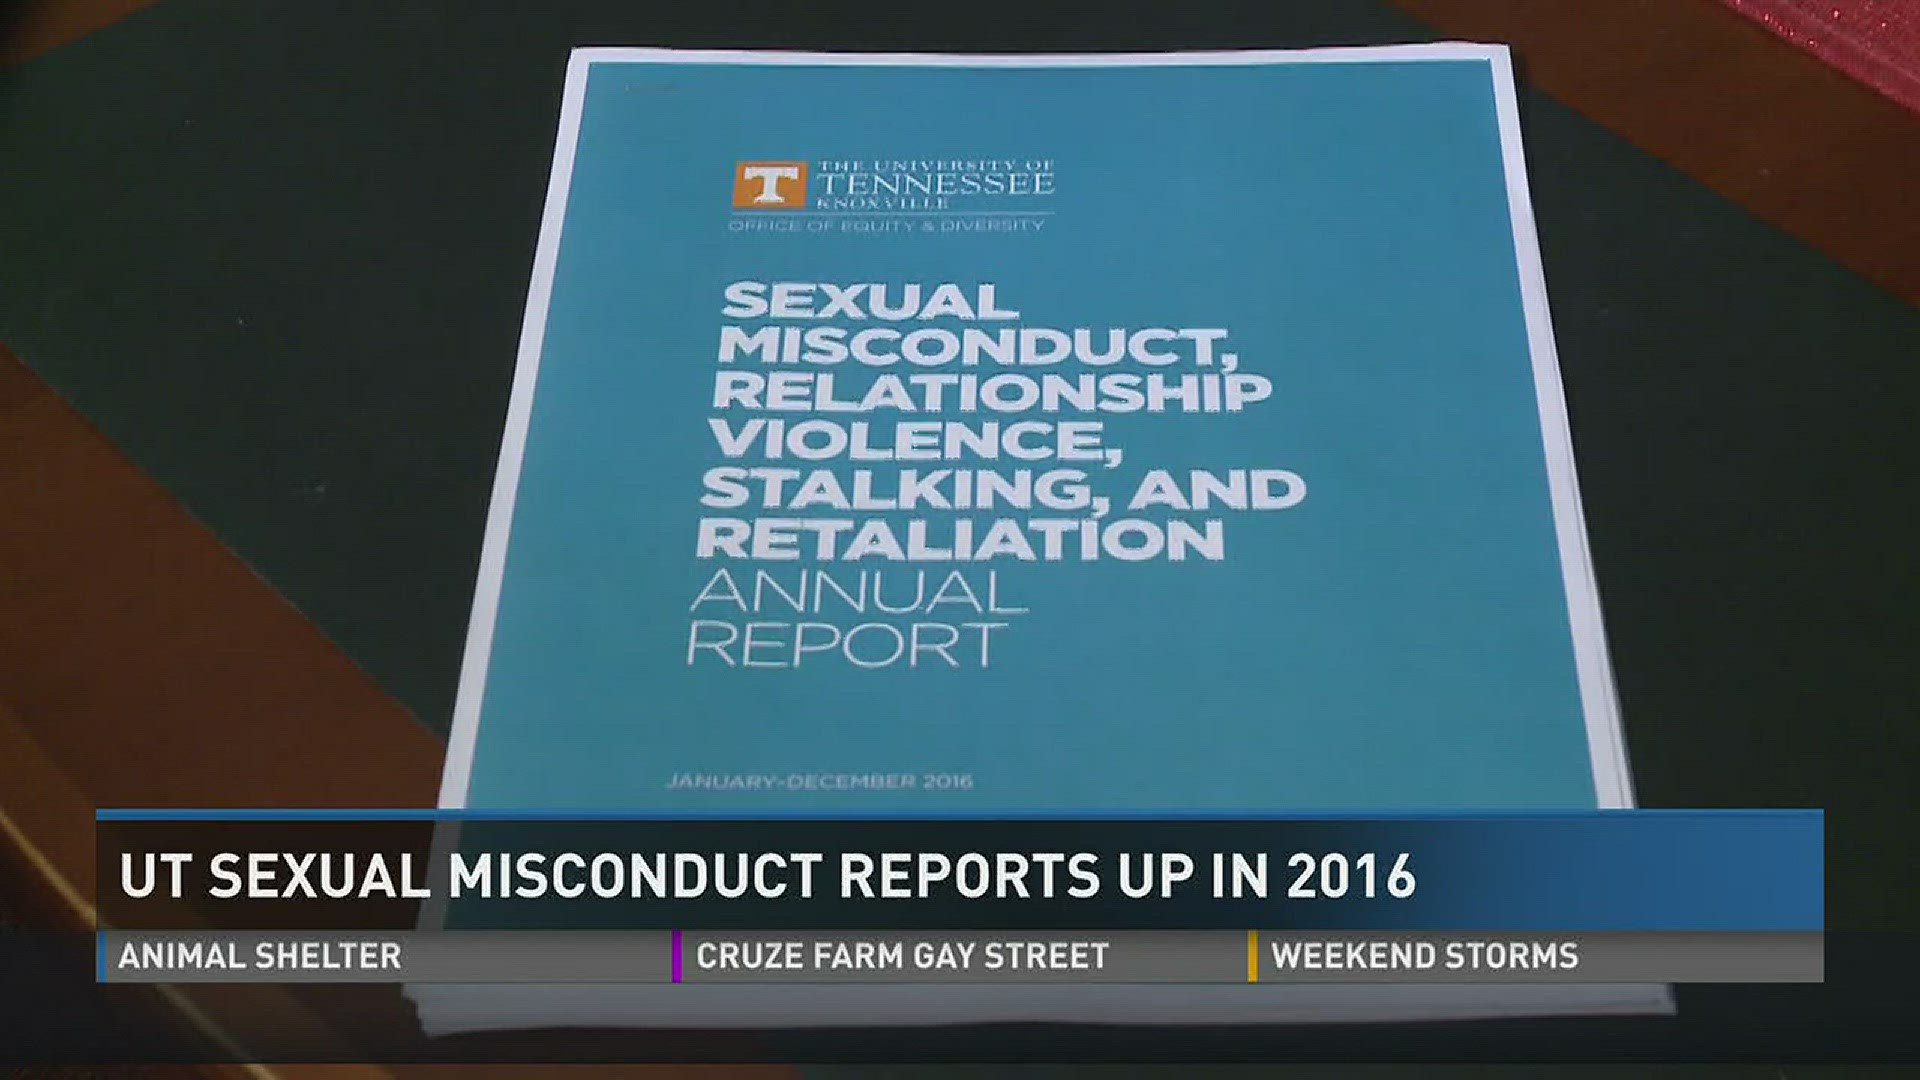 The University of Tennessee had 64 reports of sexual misconduct in 2016.